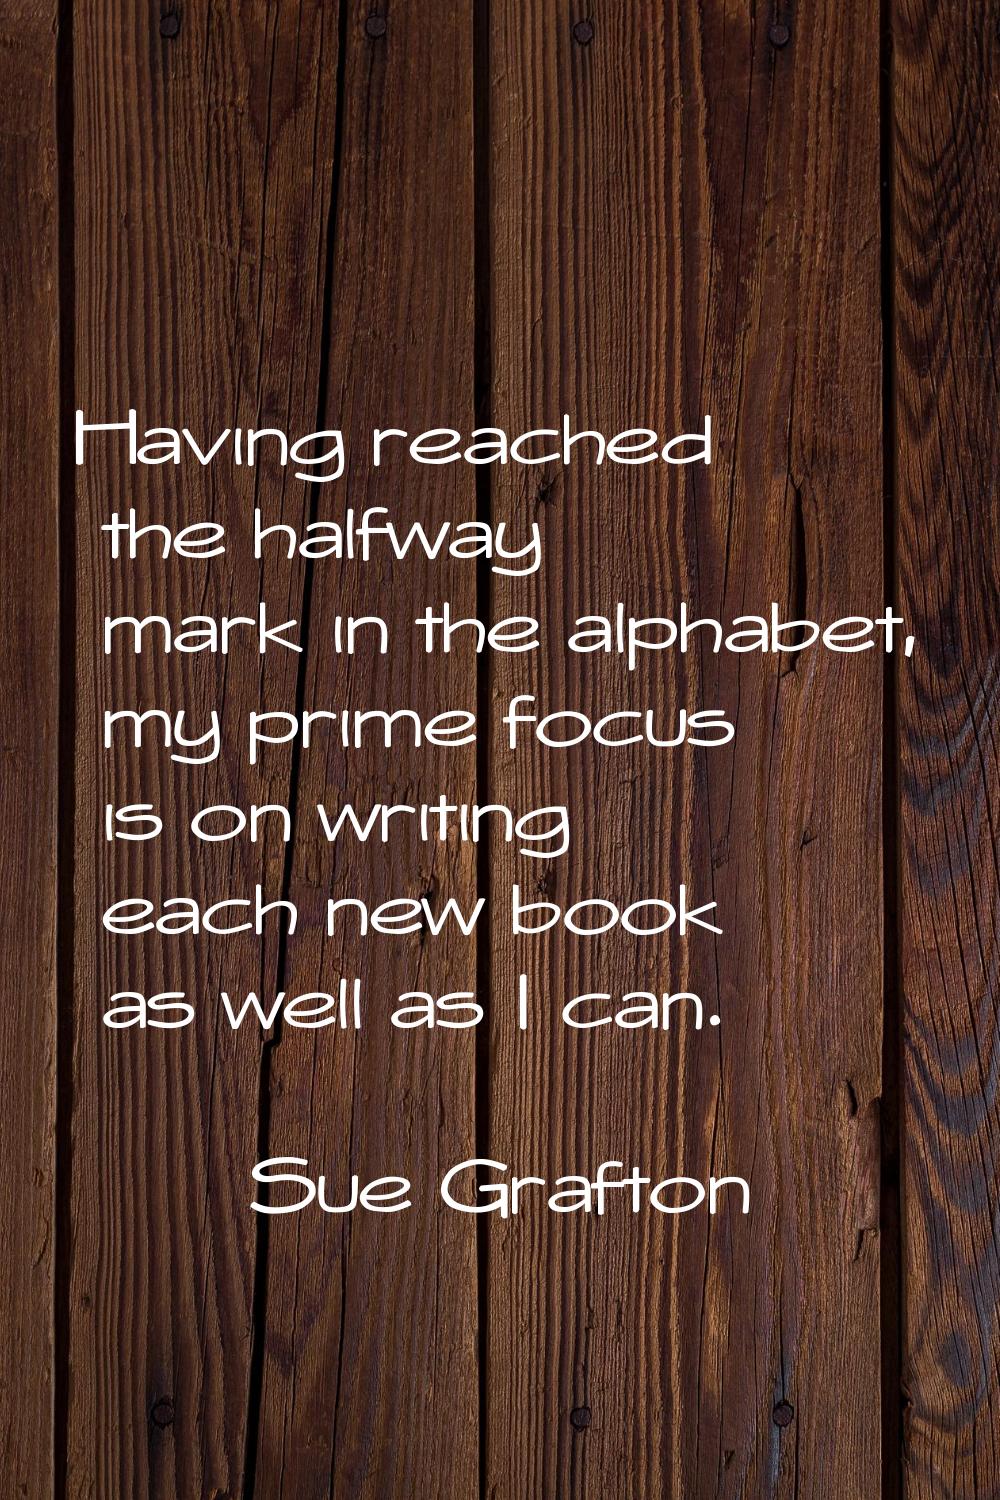 Having reached the halfway mark in the alphabet, my prime focus is on writing each new book as well